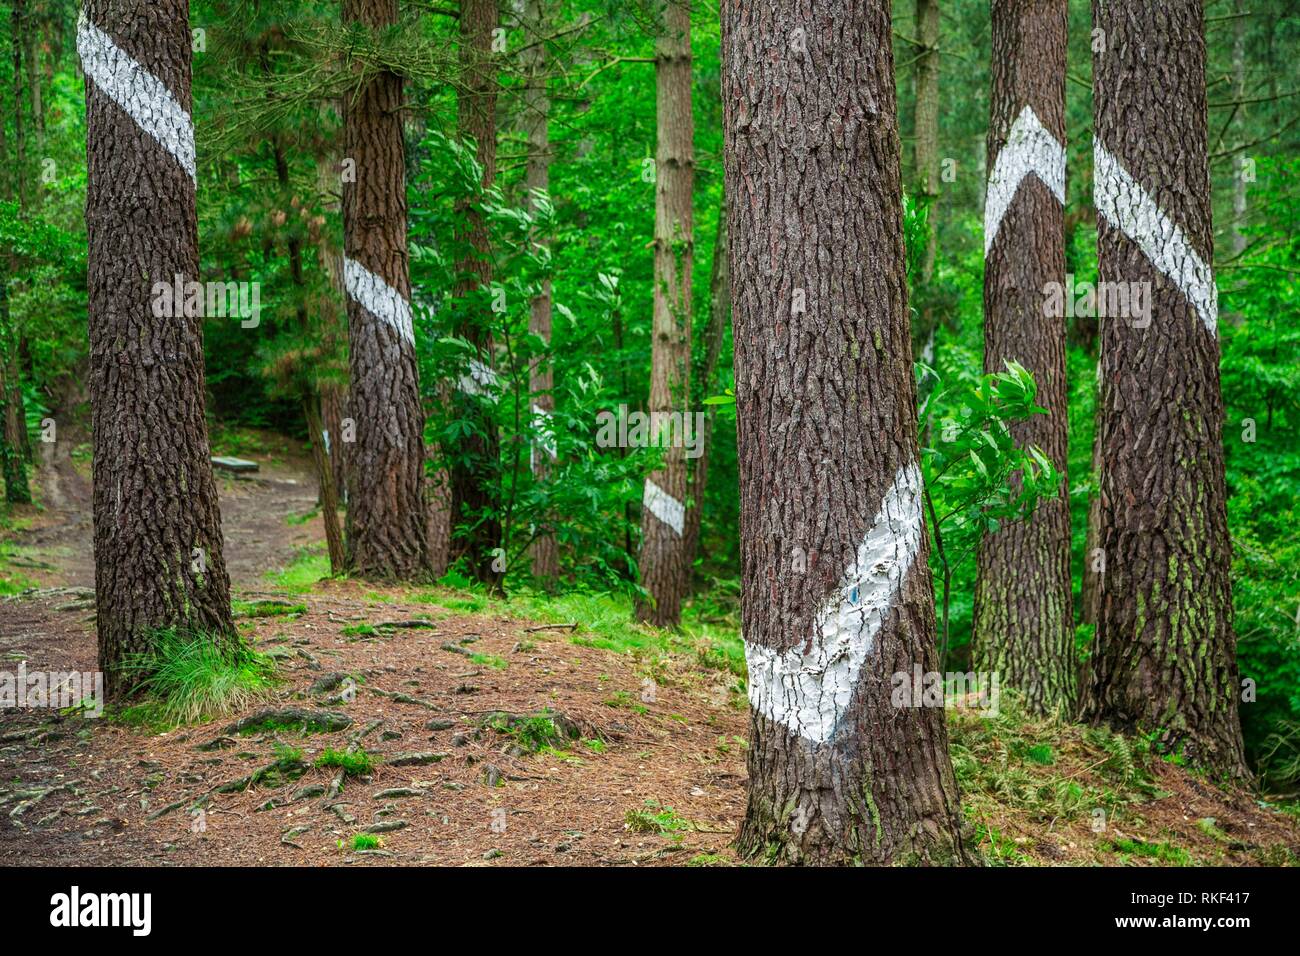 Oma Forest. Forest painted by Agustin Ibarrola. Oma Valley. Kortezubi. Urdaibai Region. Bizkaia. Basque Country. Spain. Stock Photo